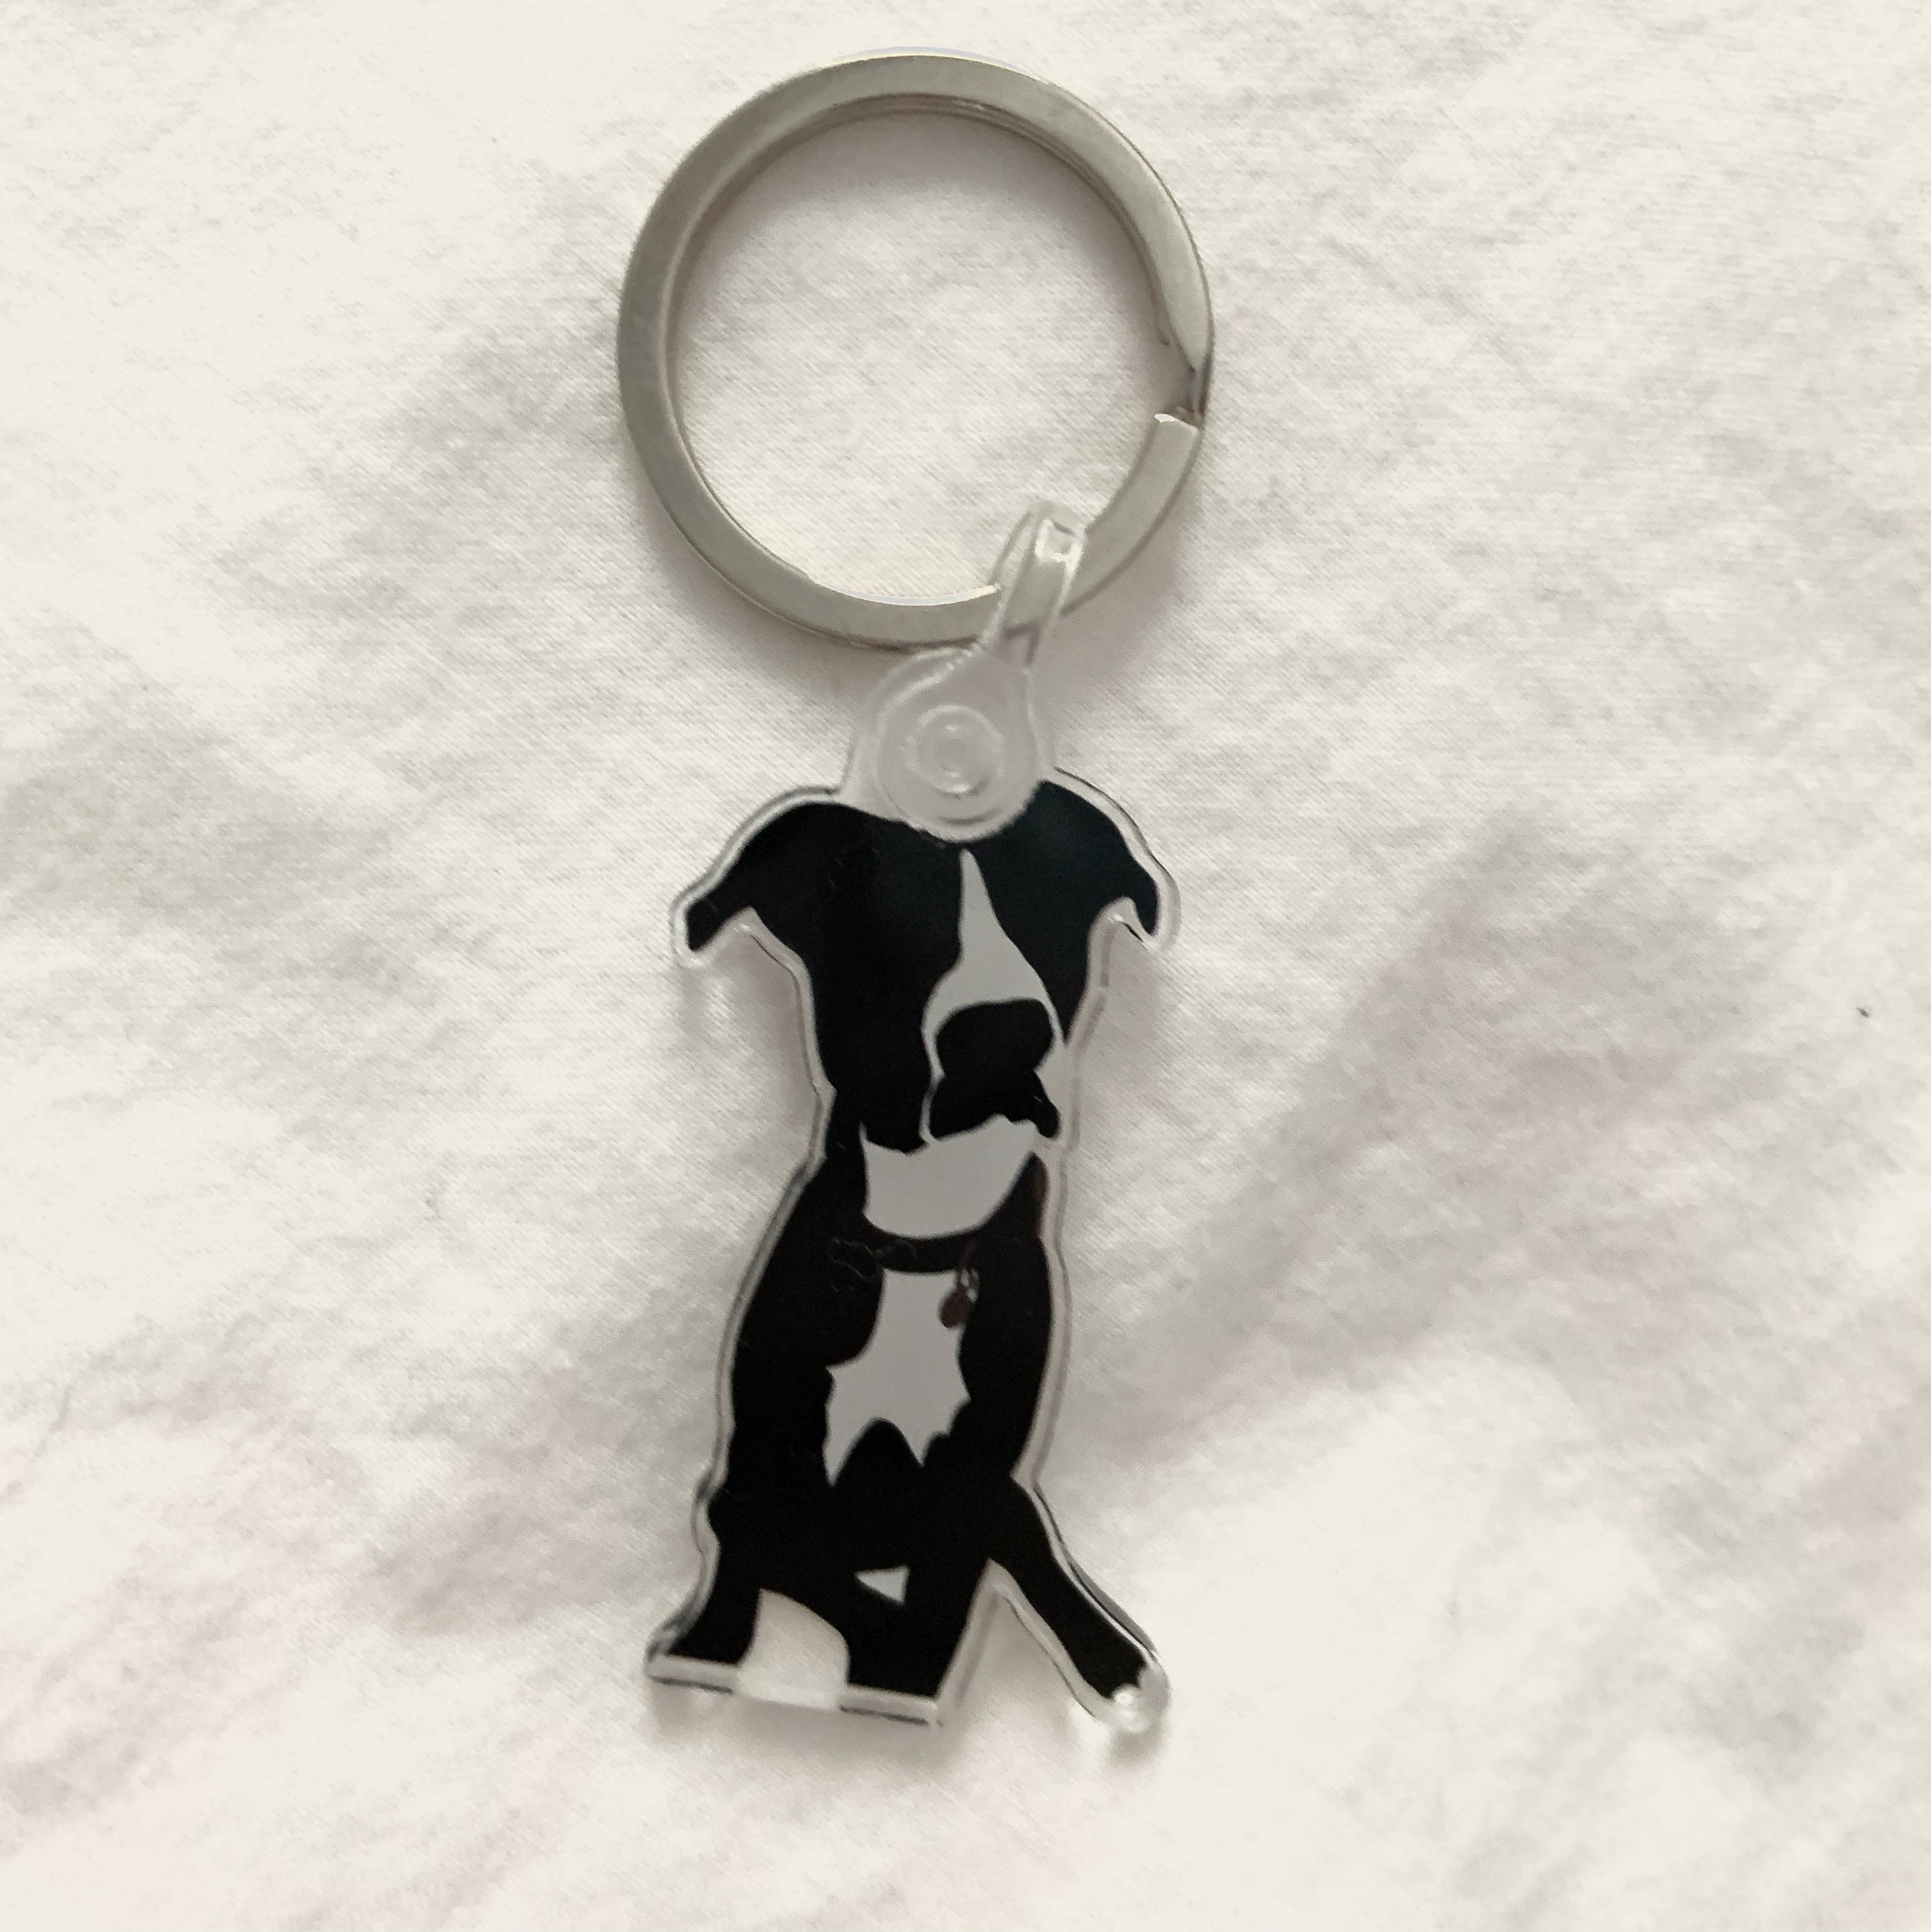 Handmade in the USA from Rustic Metal Pit Bull Keychain or Purse Charm 